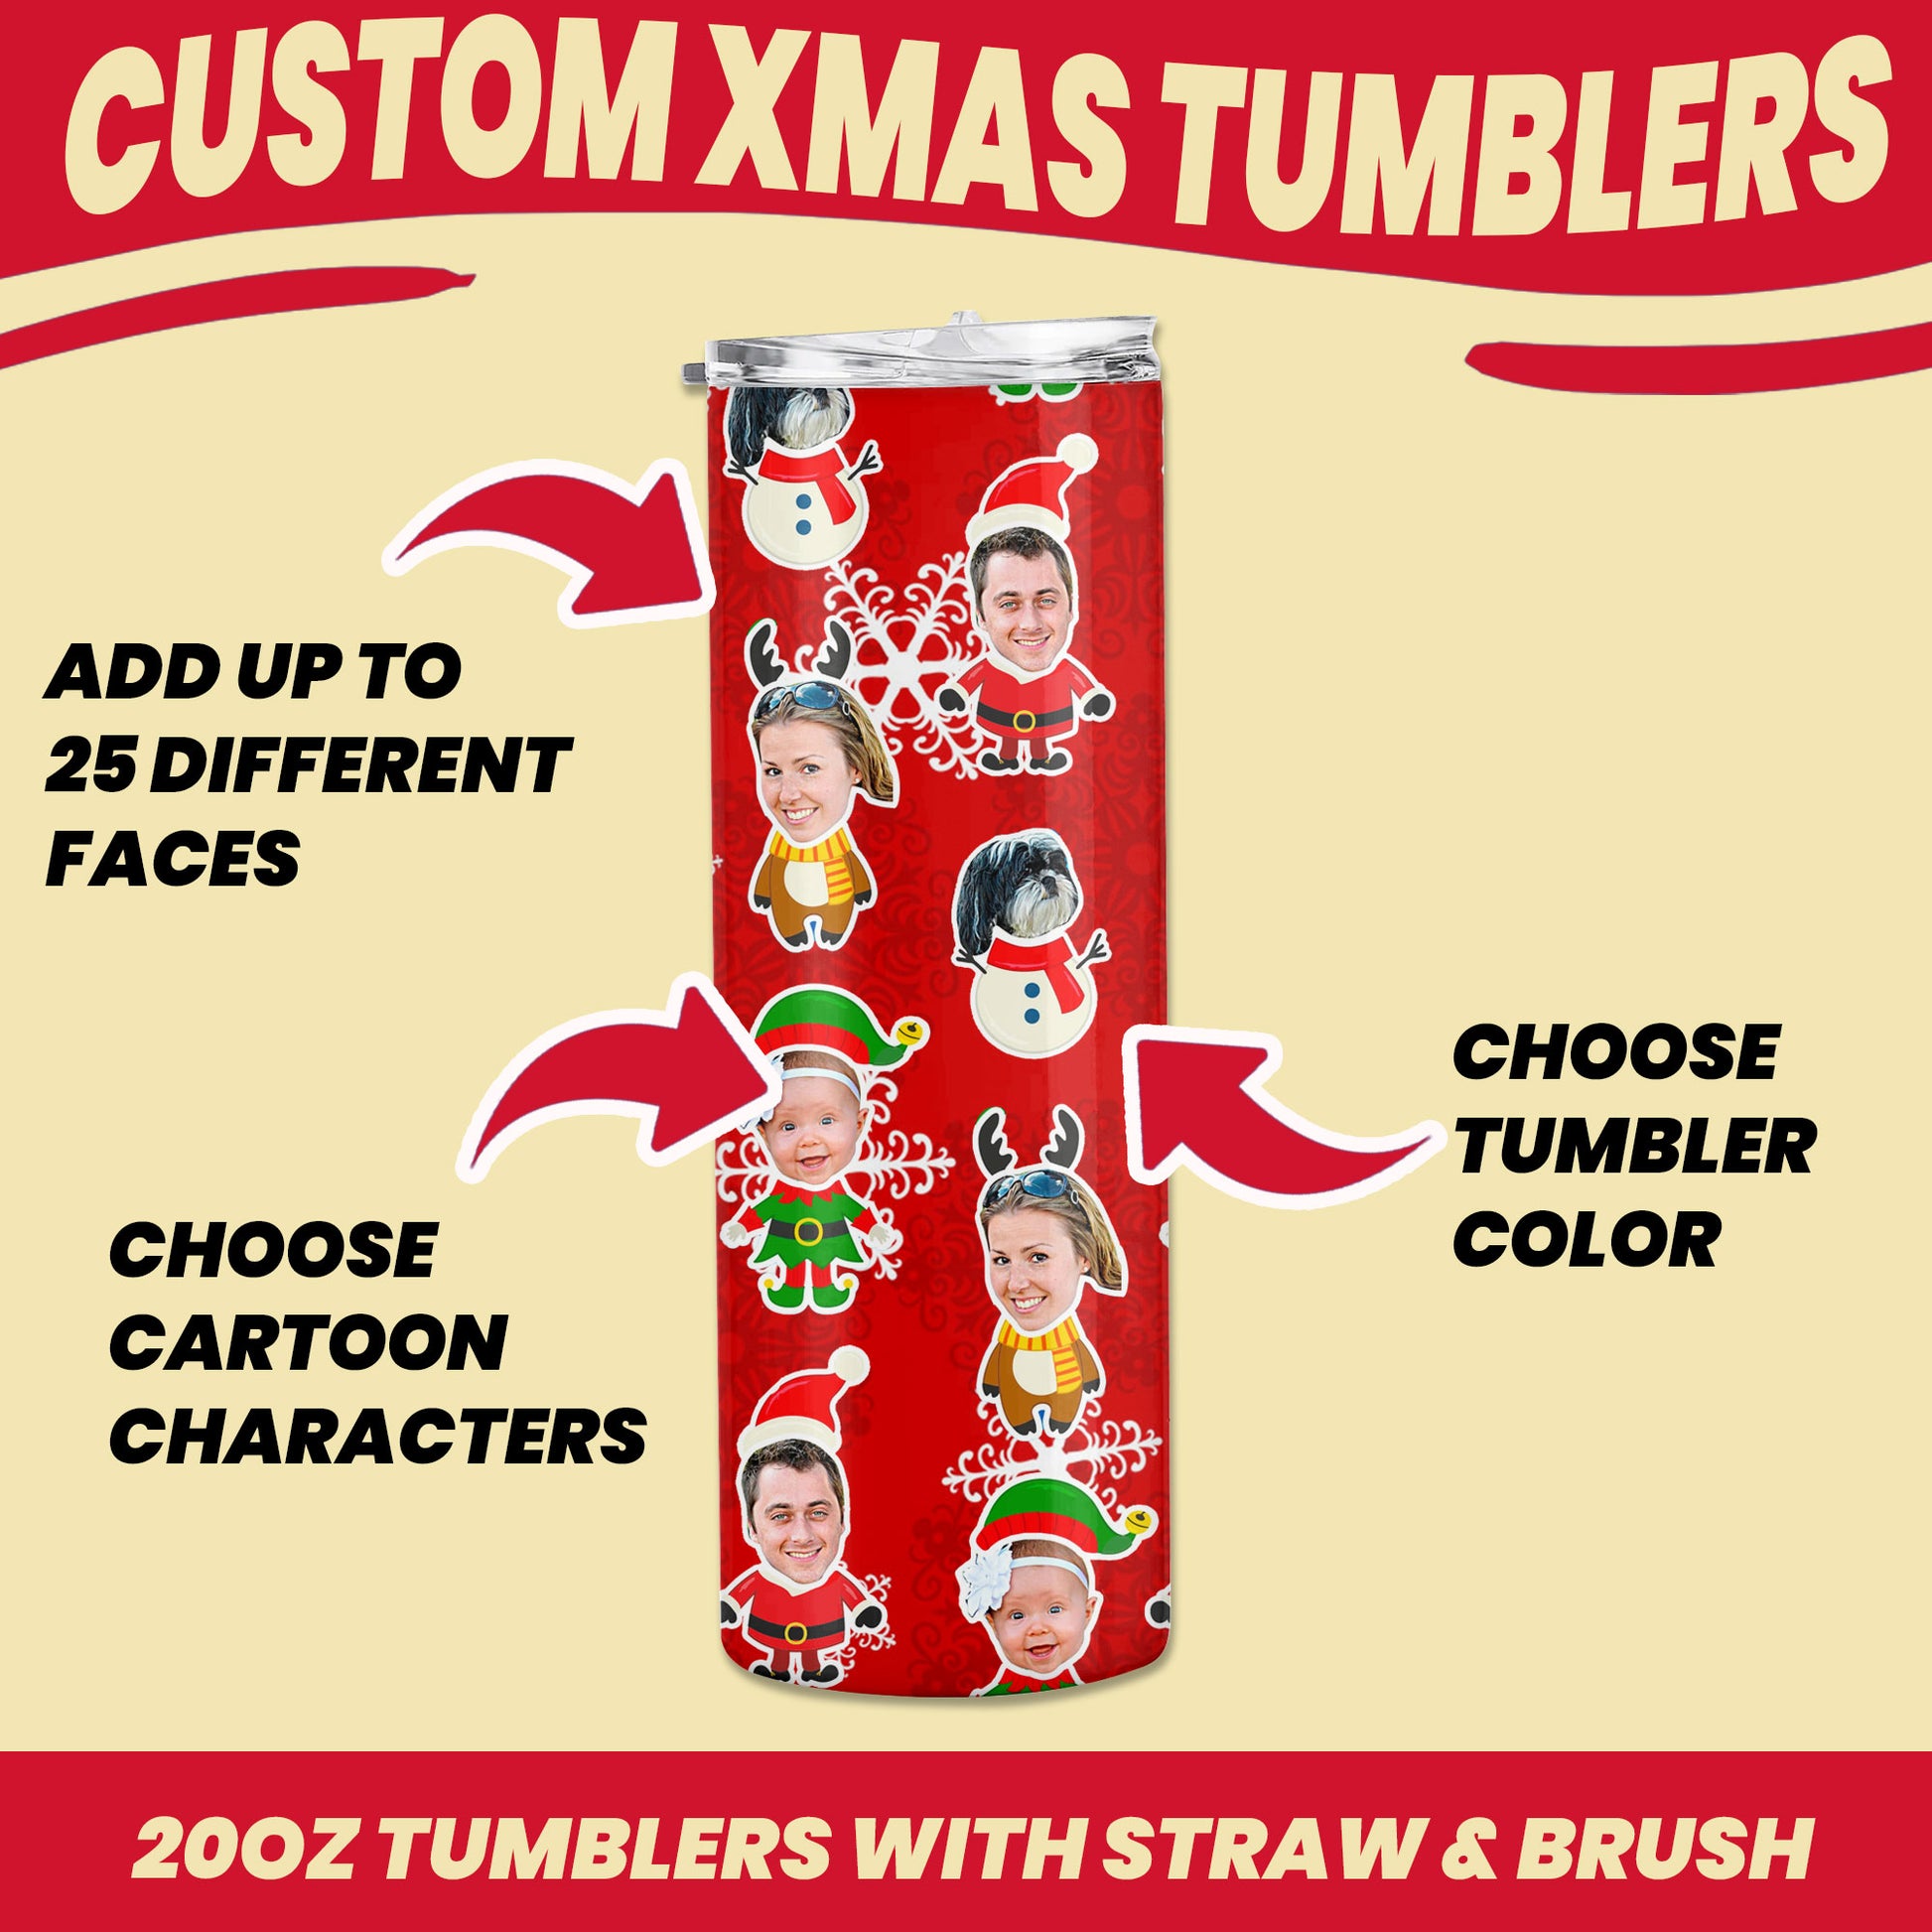 custom christmas holiday gift tumbler personalization options like multiple faces, background and cartoon characters